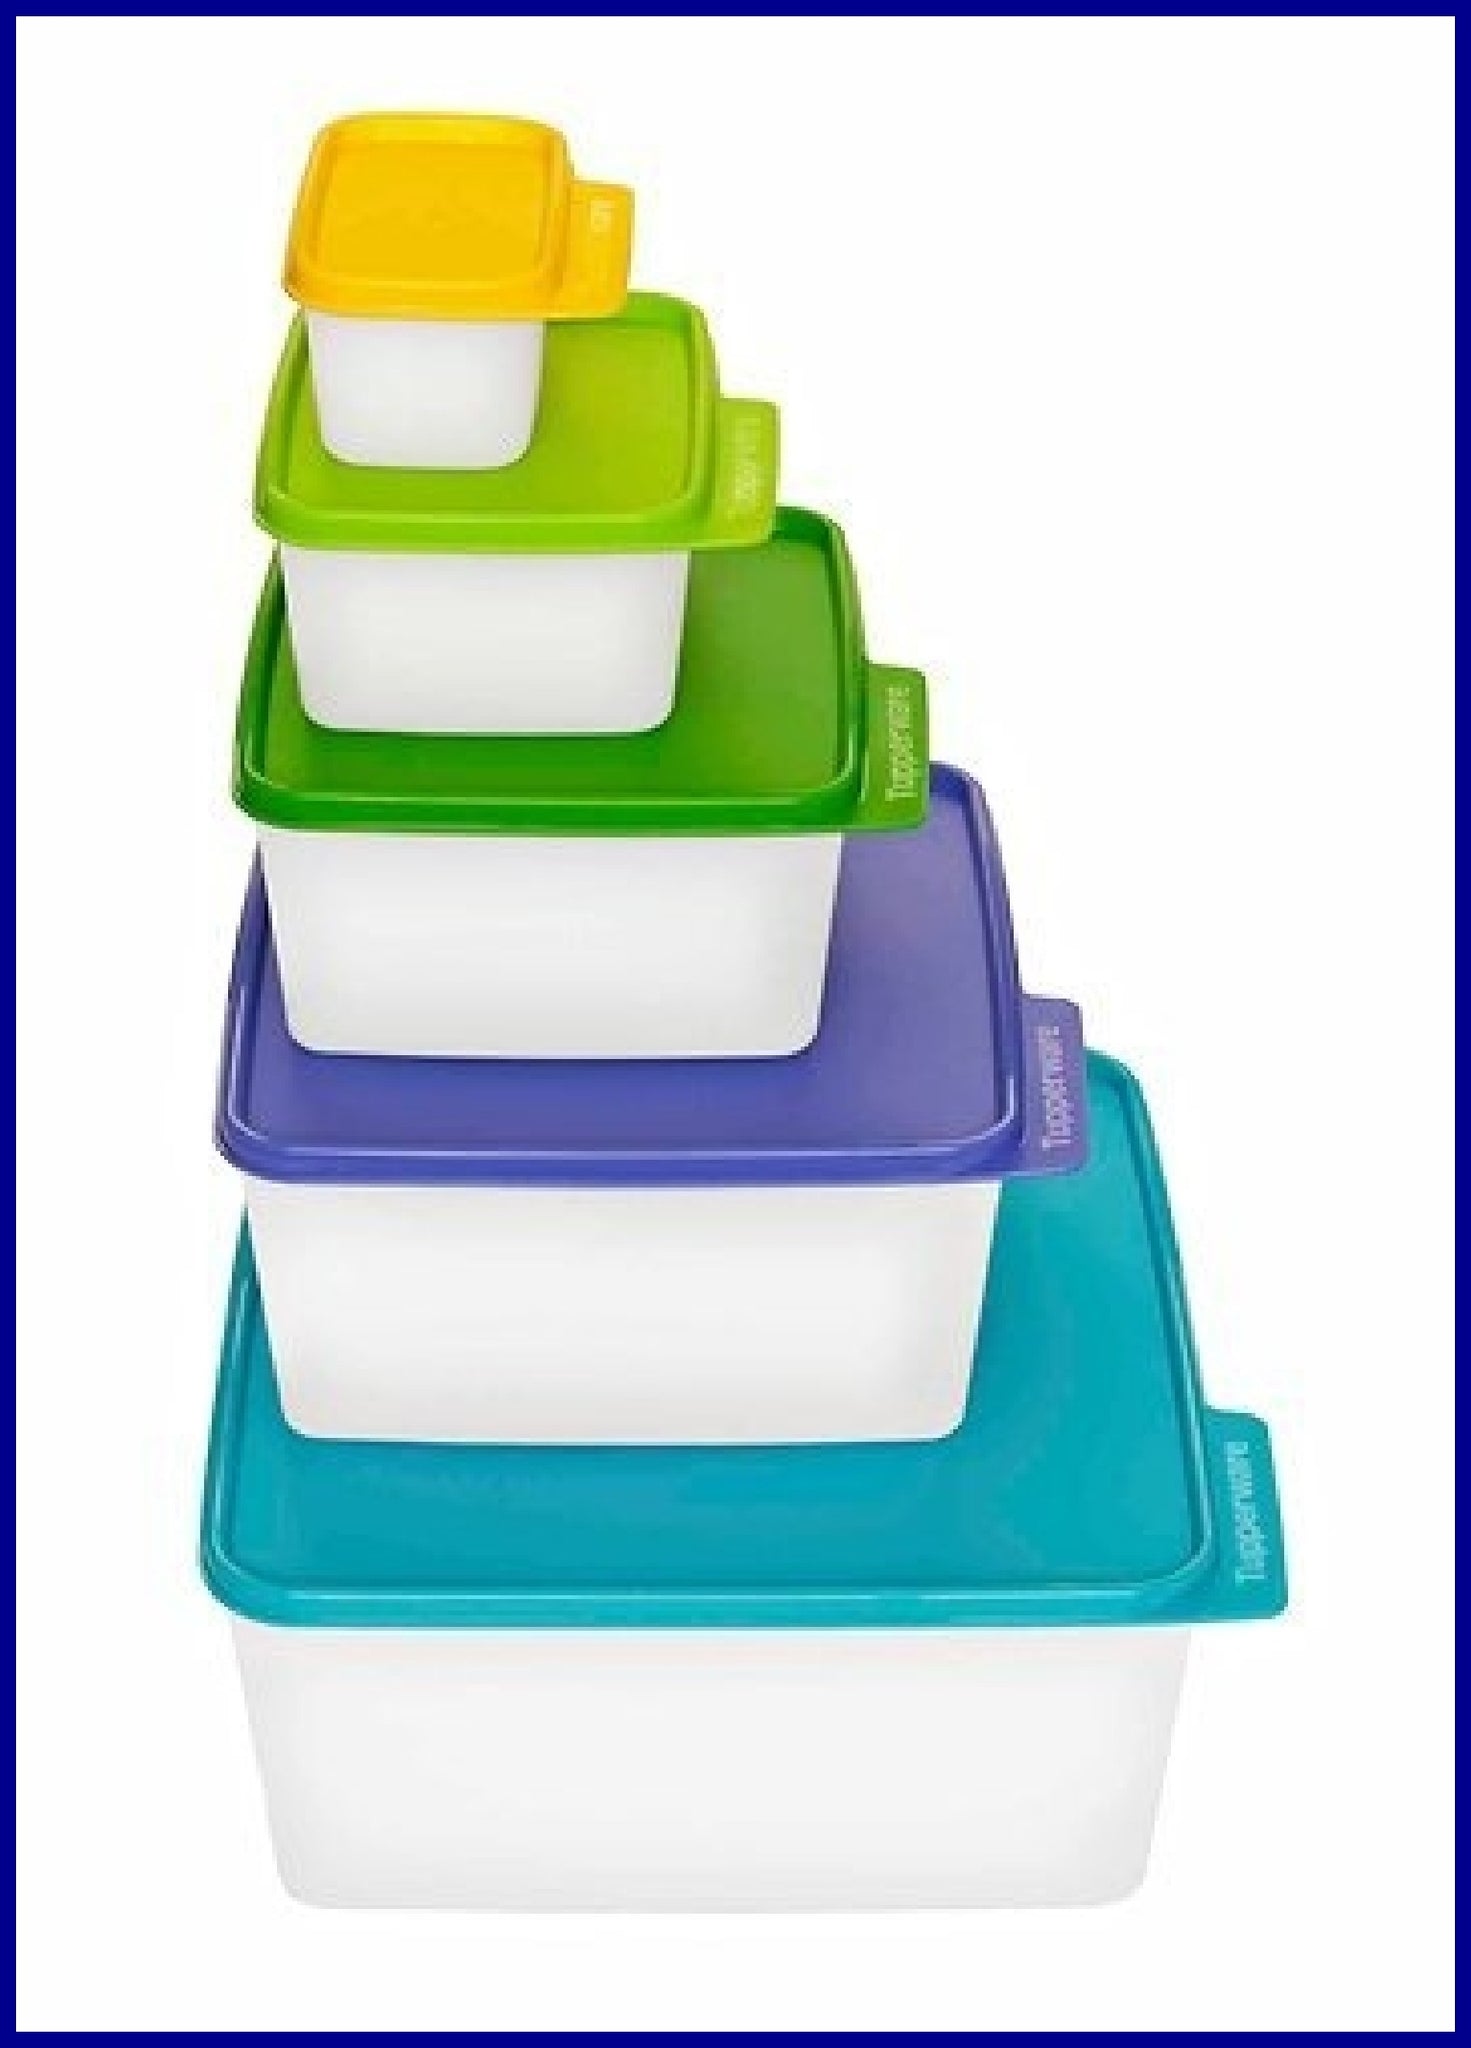 Tupperware FreezeSmart Freezer Containers Set of 4 Sizes Mixed Colors